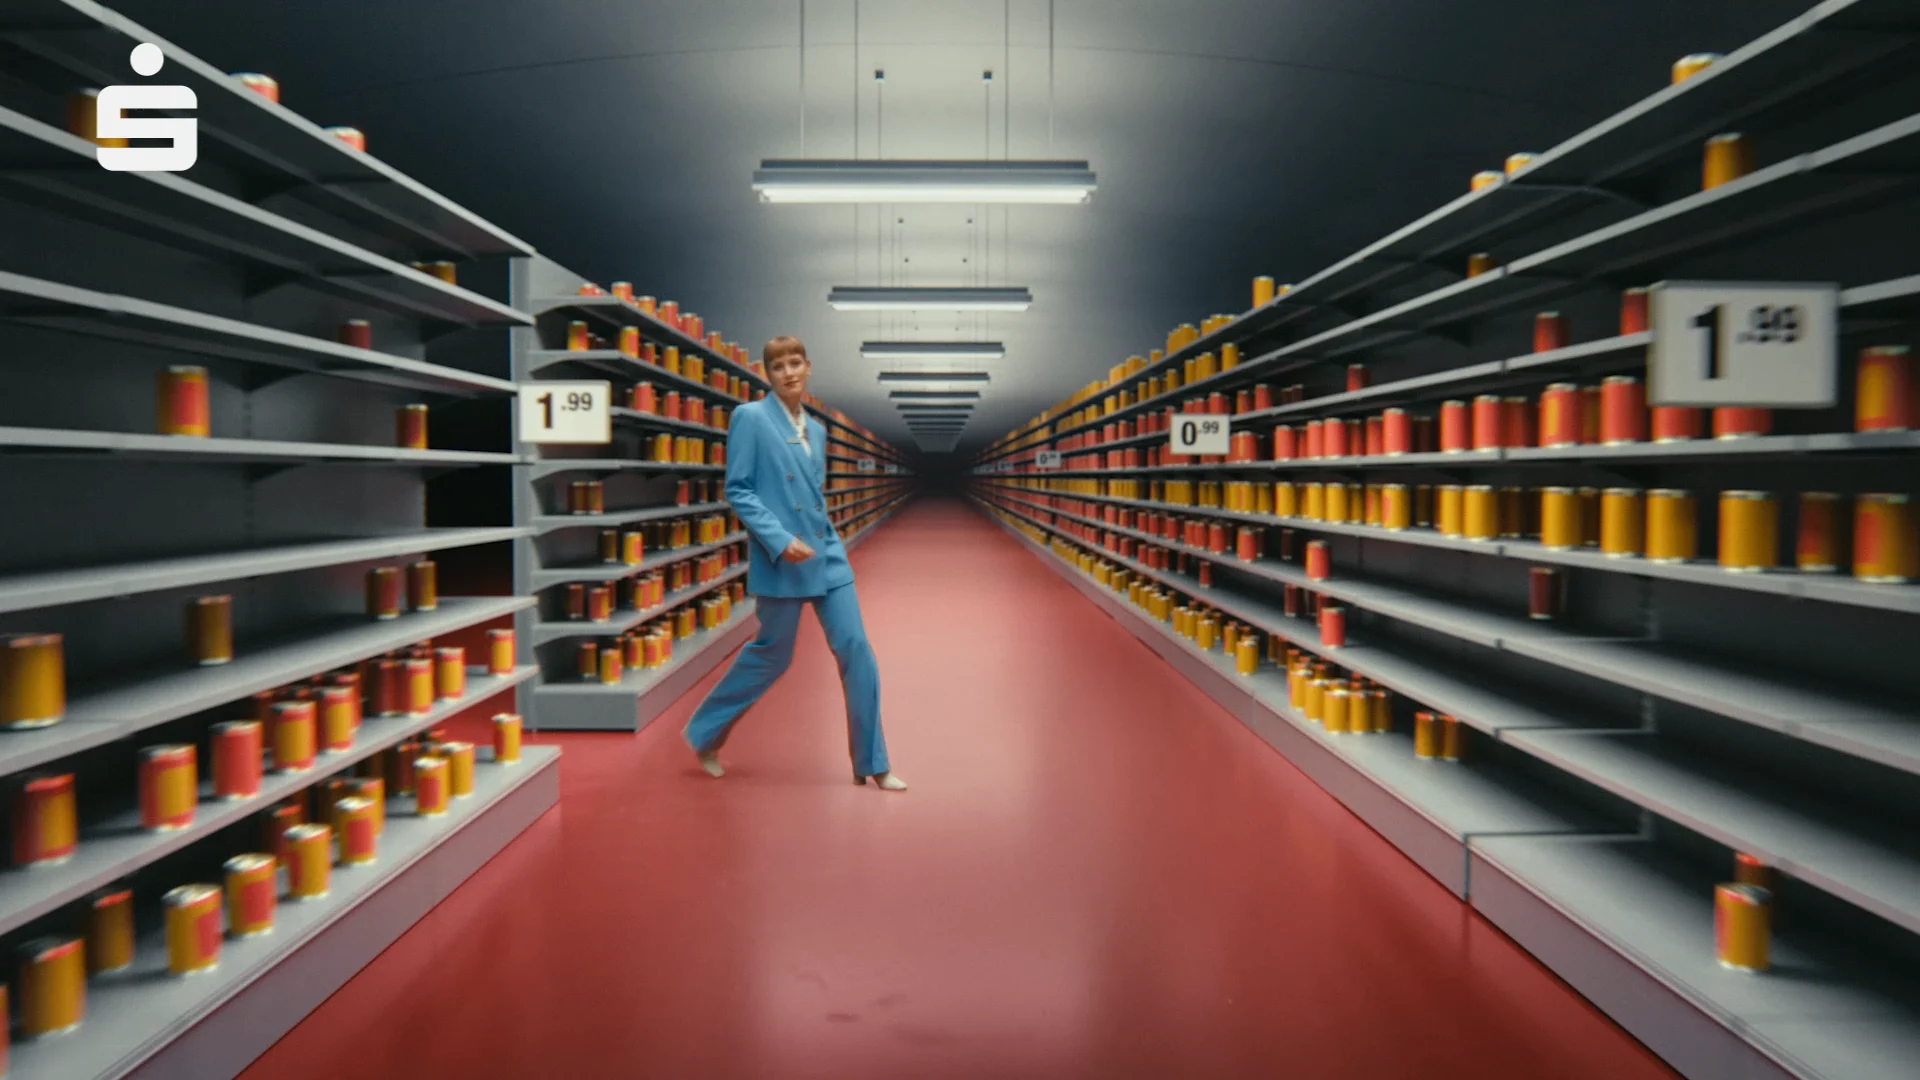 a woman walking between two shelves in a super markes. in both shelves there are red and orange cans and price tags